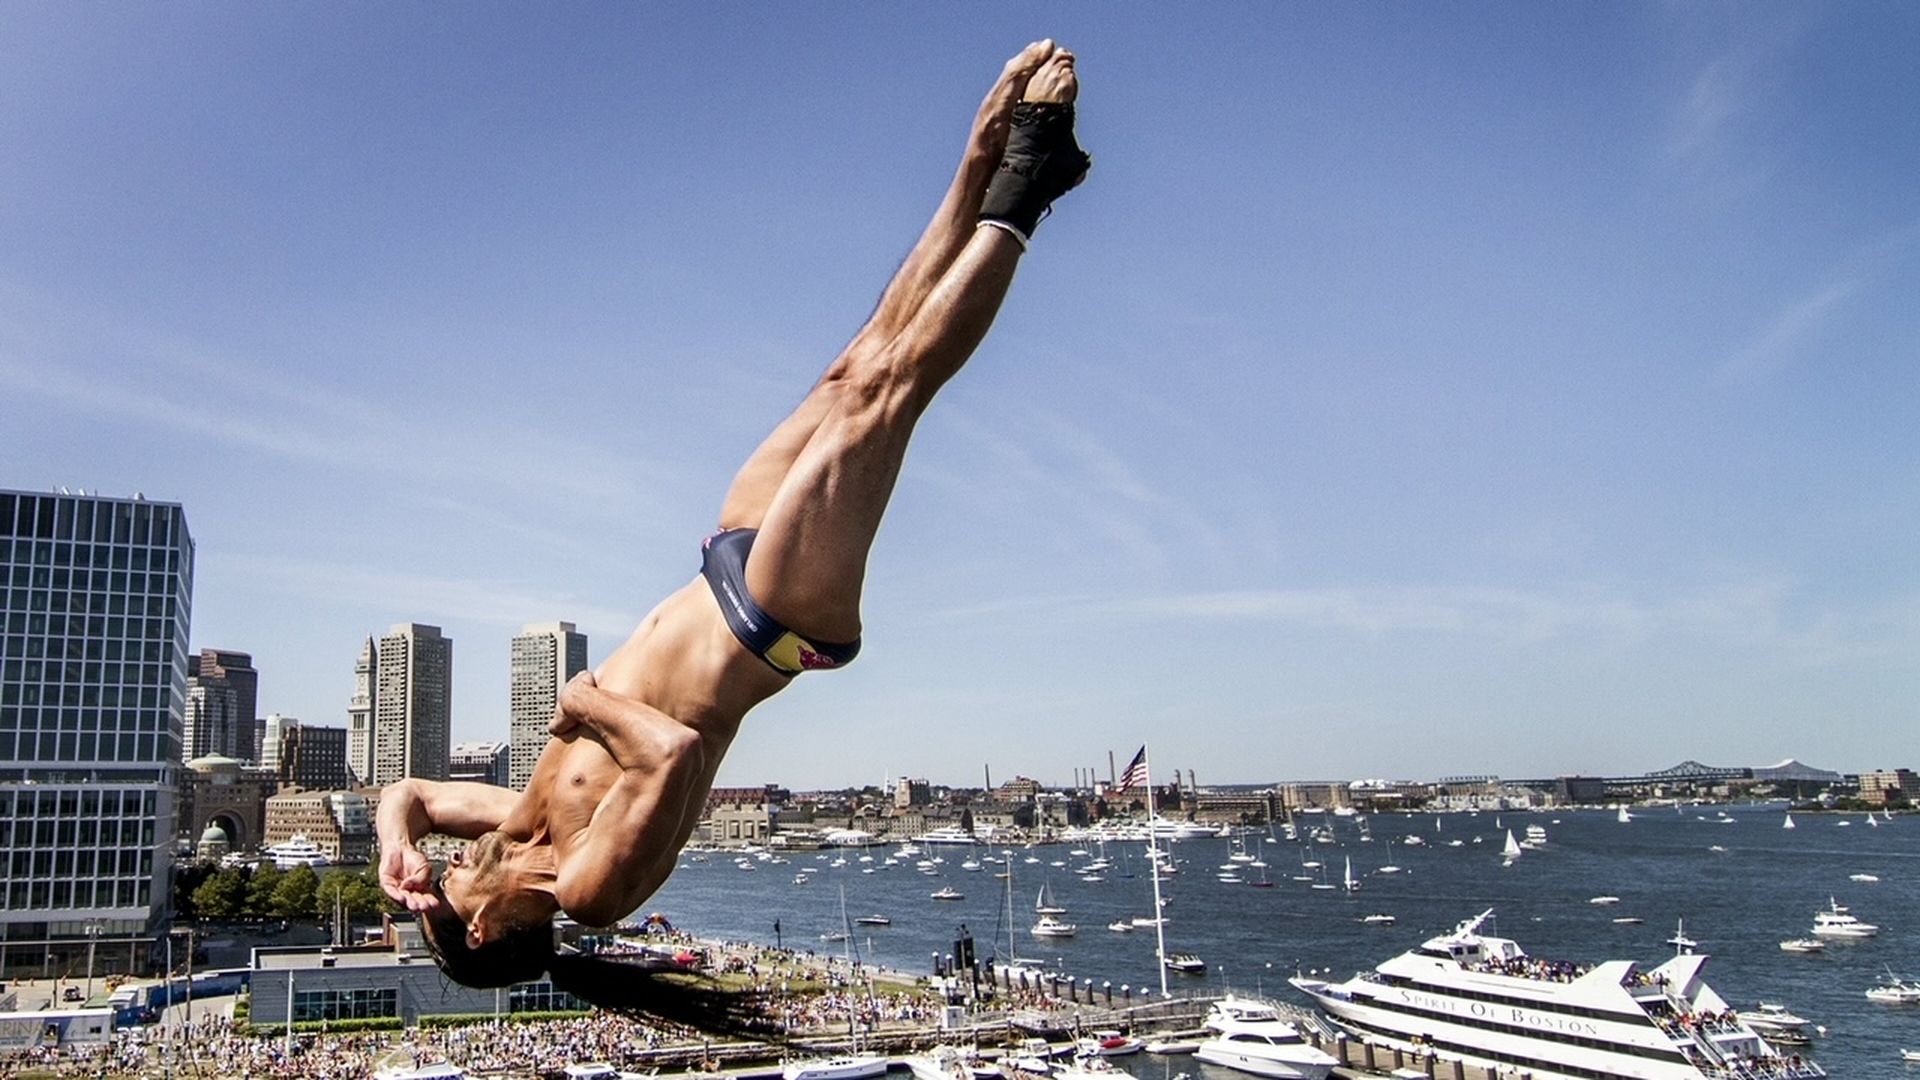 A man dives off 90 feet above the Boston Harbor.